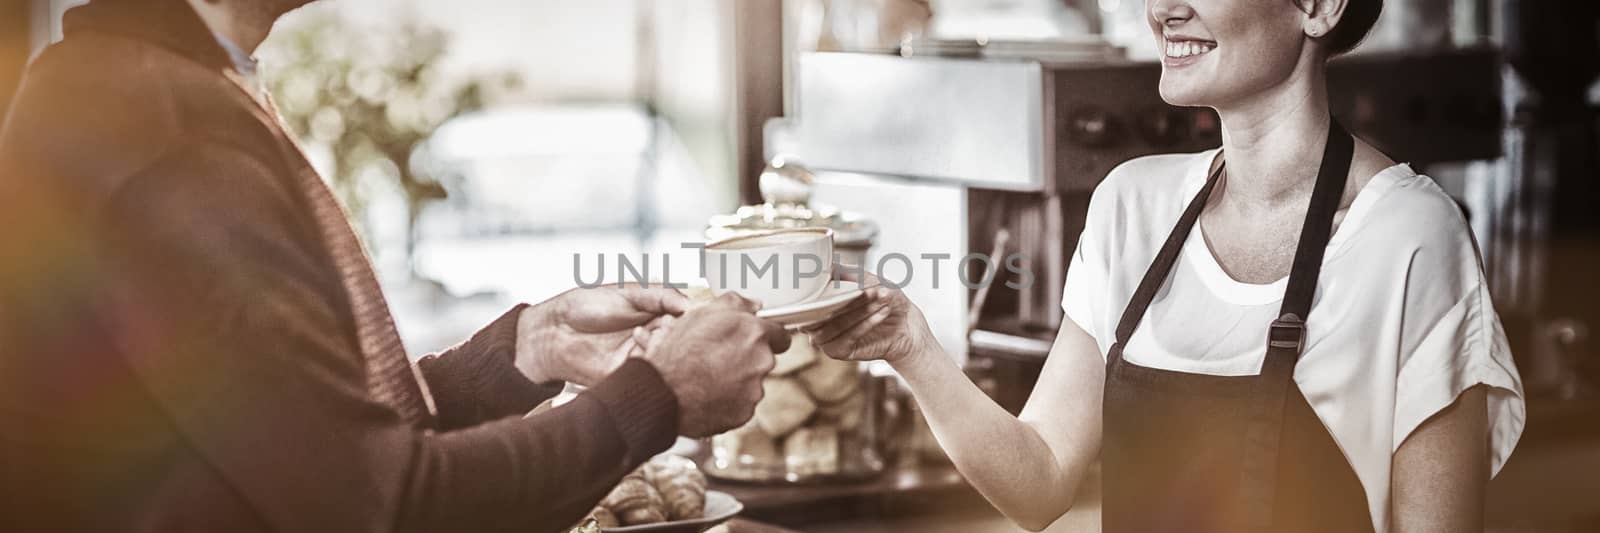 Waitress serving a cup of coffee to customer by Wavebreakmedia